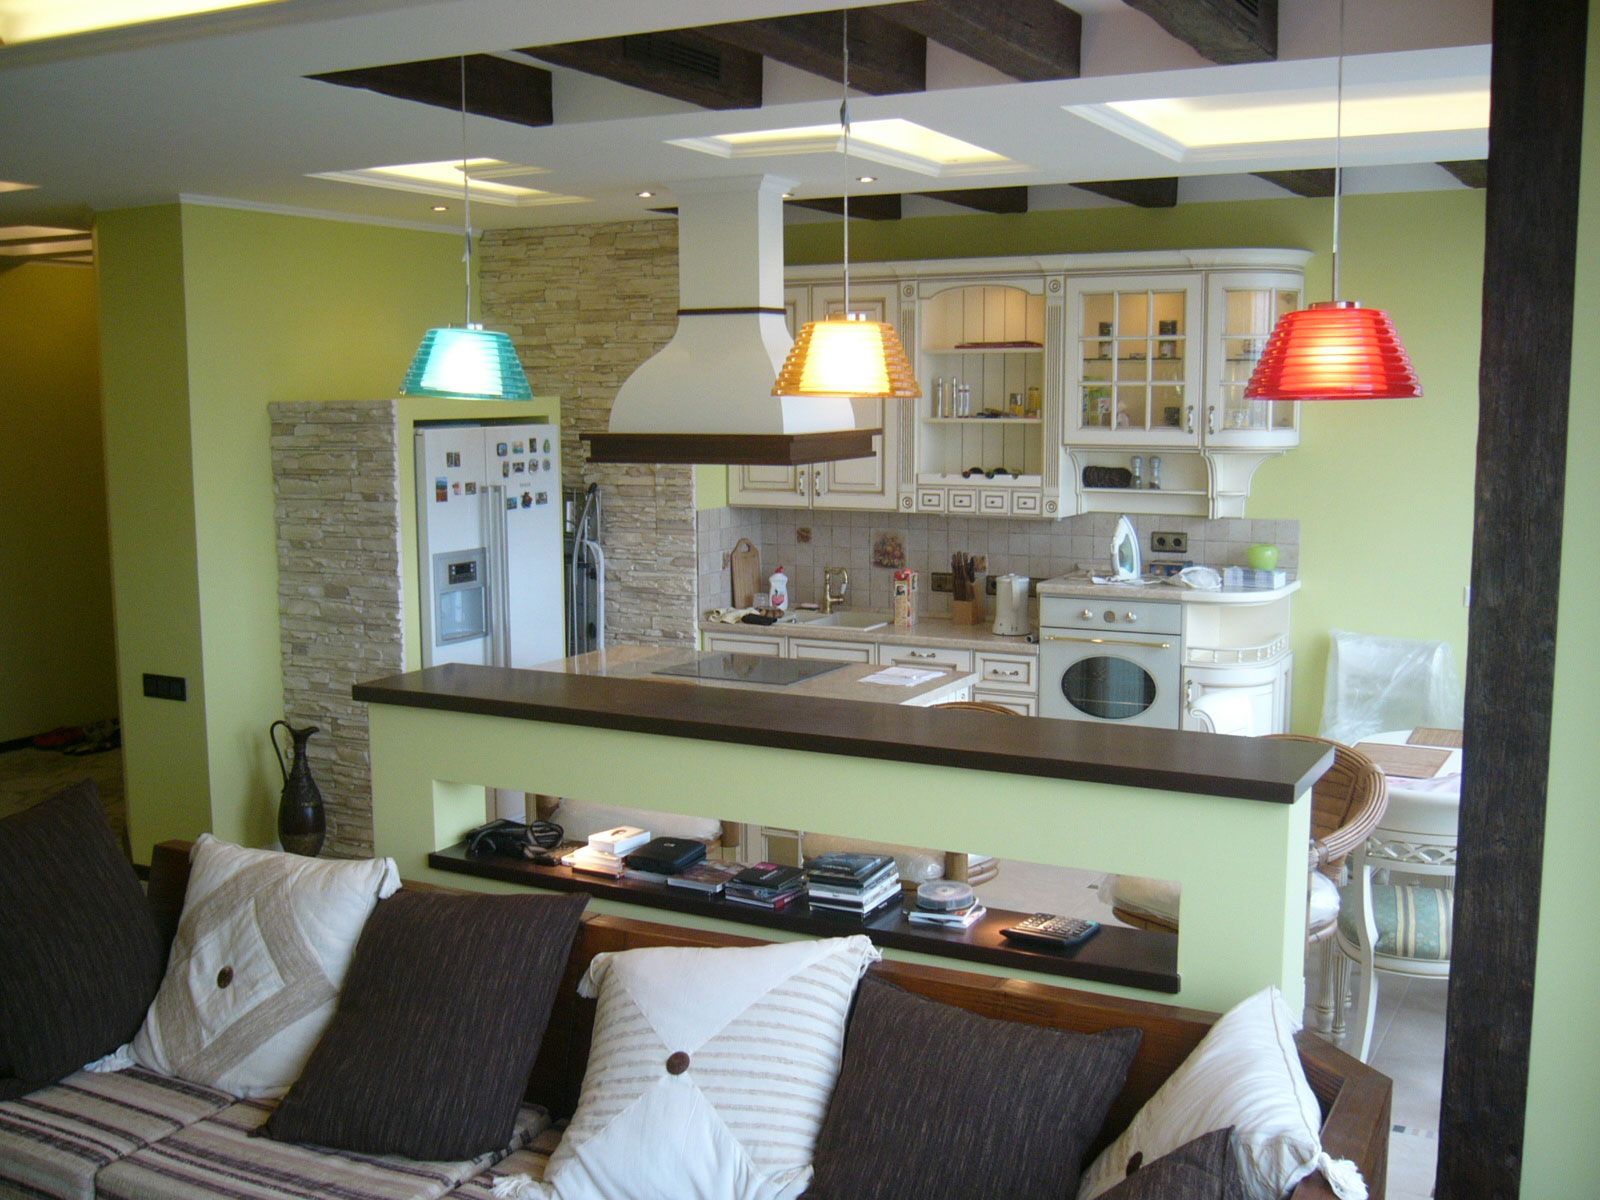 Lime wall color theme in the living room combined with kitchen zone and separated by the bar island